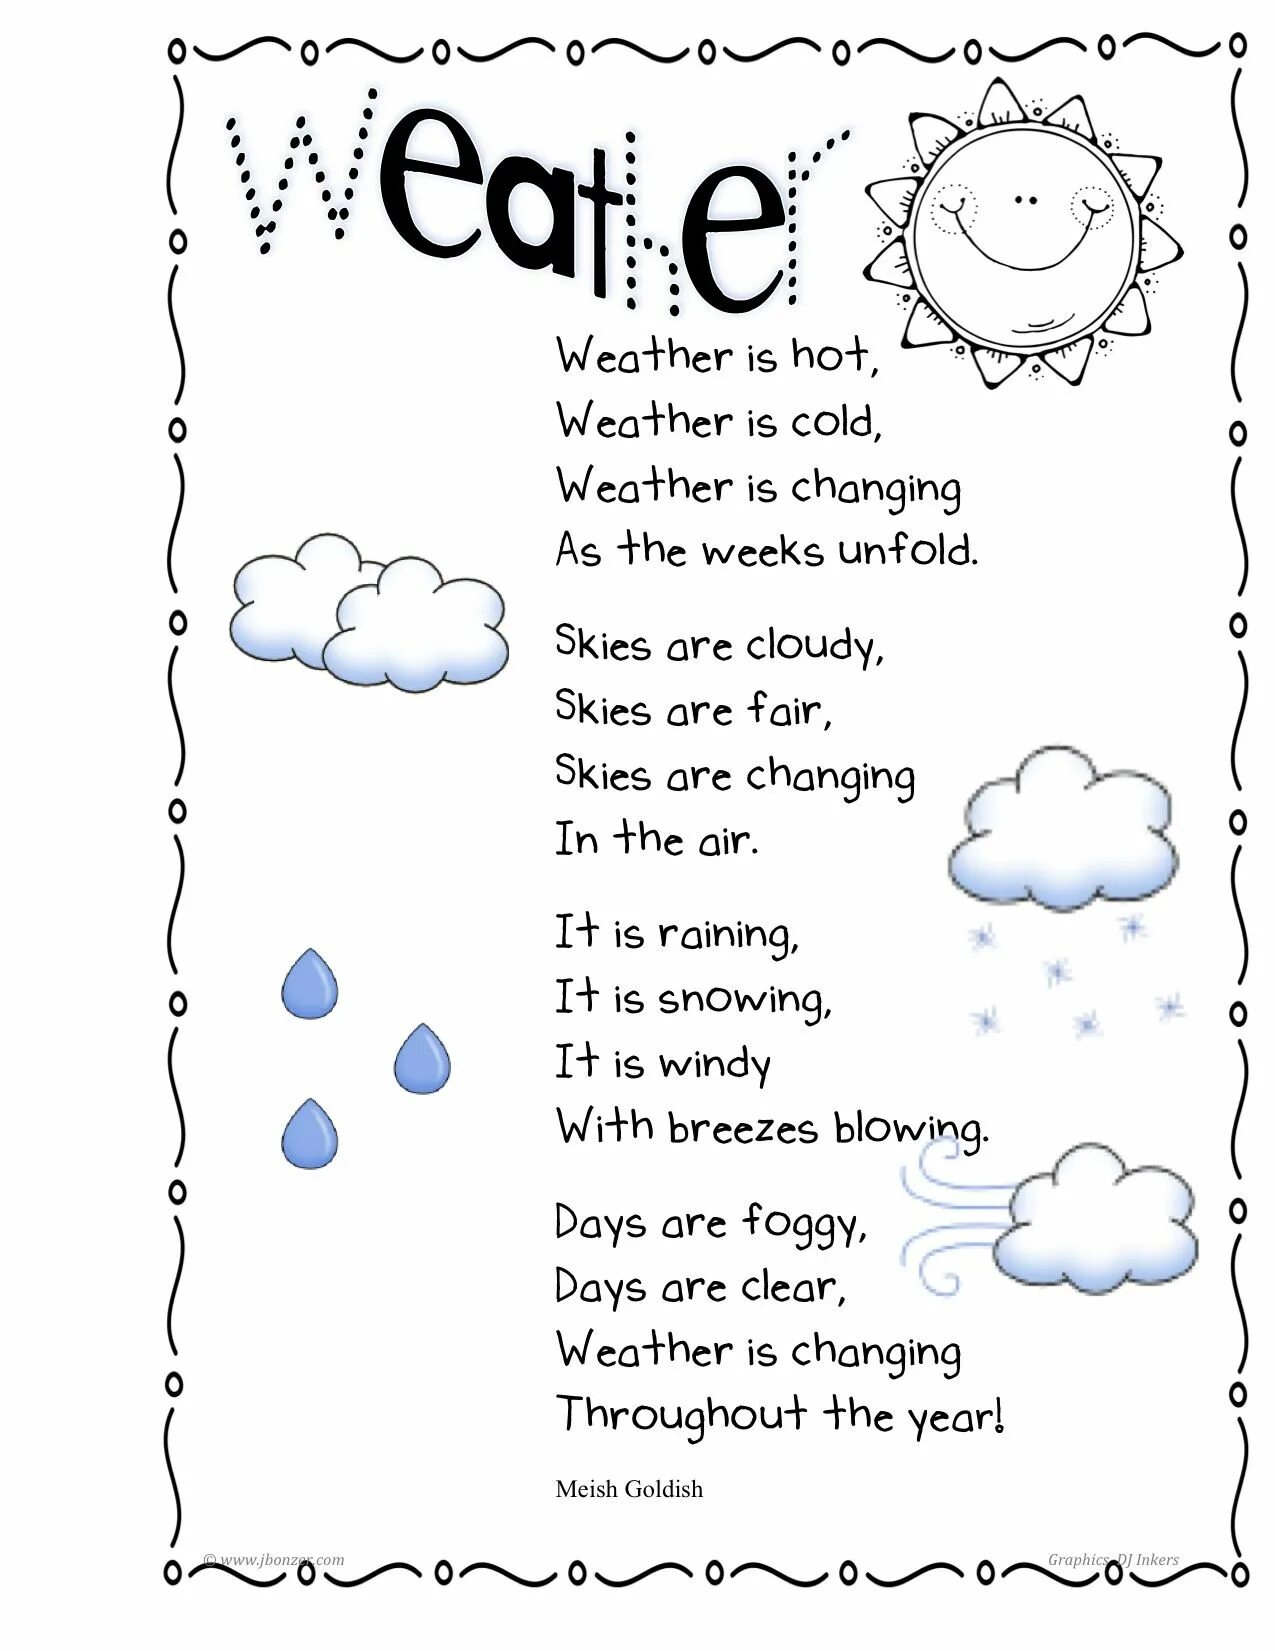 Poems about the weather for children. Weather poem. Poem about weather for Kids. Стих weather. Стих what weather